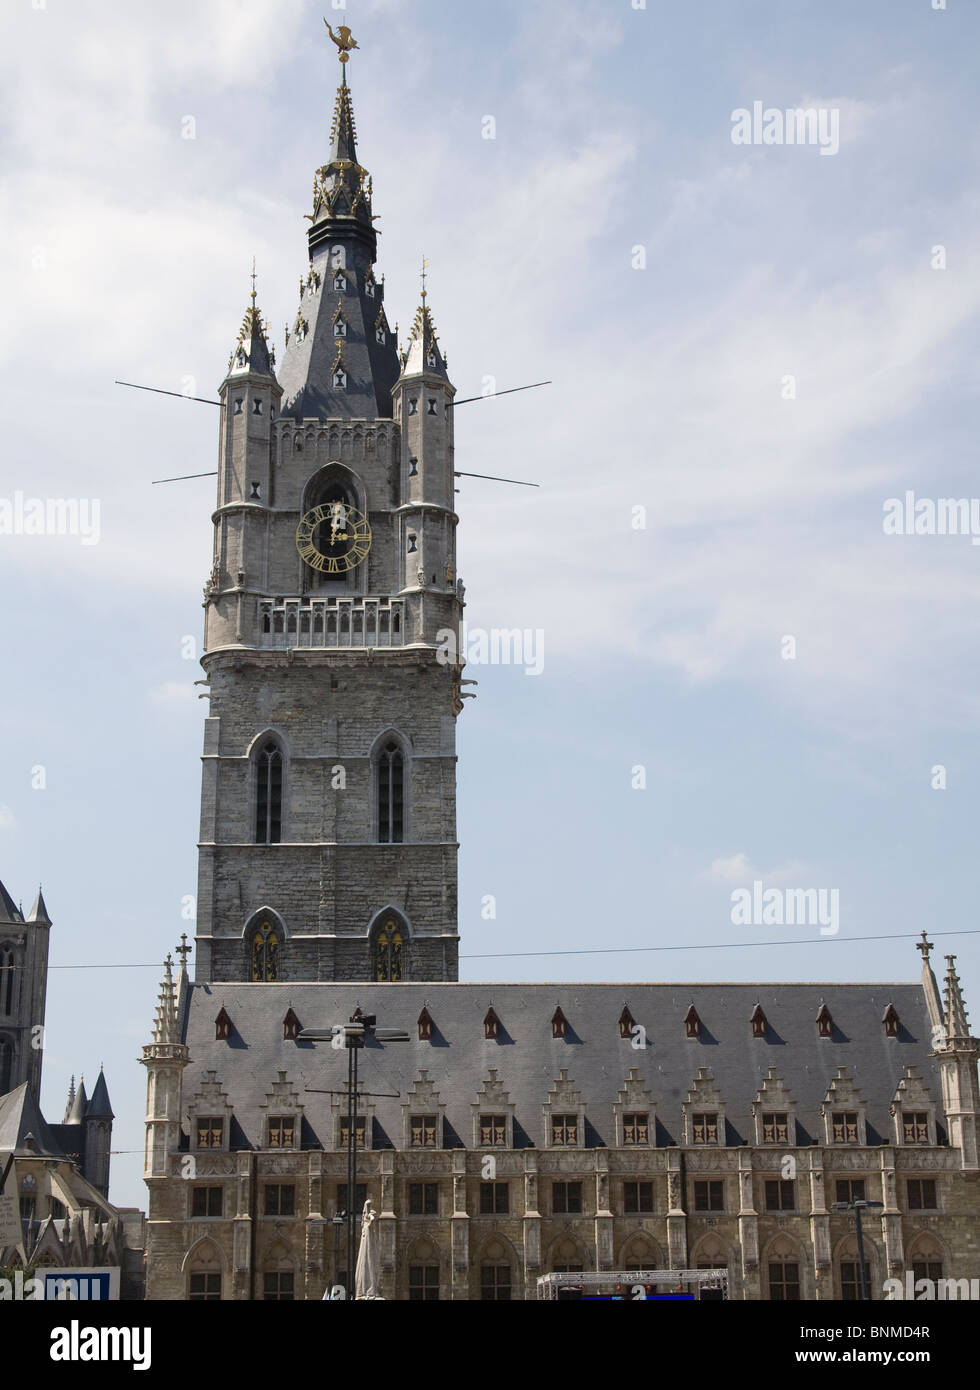 Ghent Belgium EU The Belfry in the historic centre dates from 1313 and is a prominent landmark Stock Photo